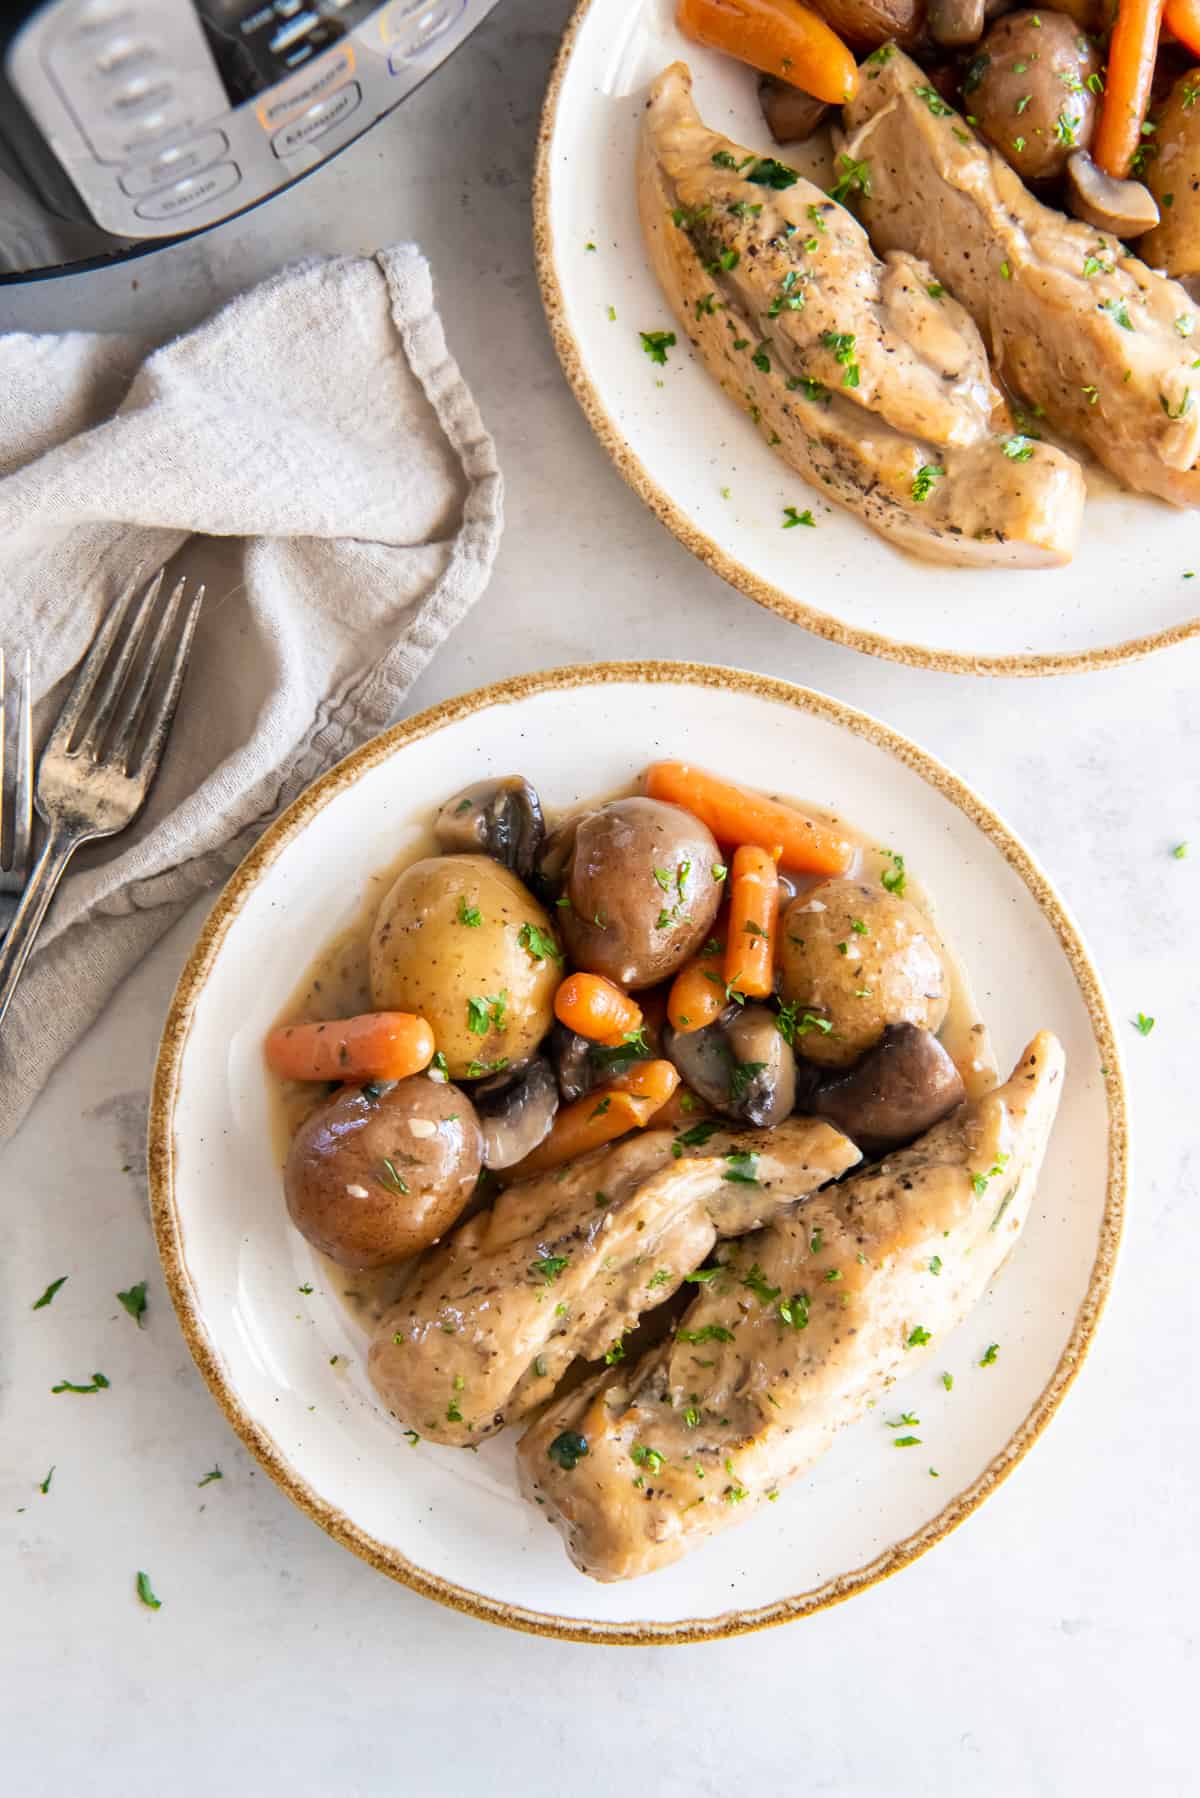 A top down view of two plates filled with ranch chicken with potatoes, carrots and mushrooms next to an Instant Pot.